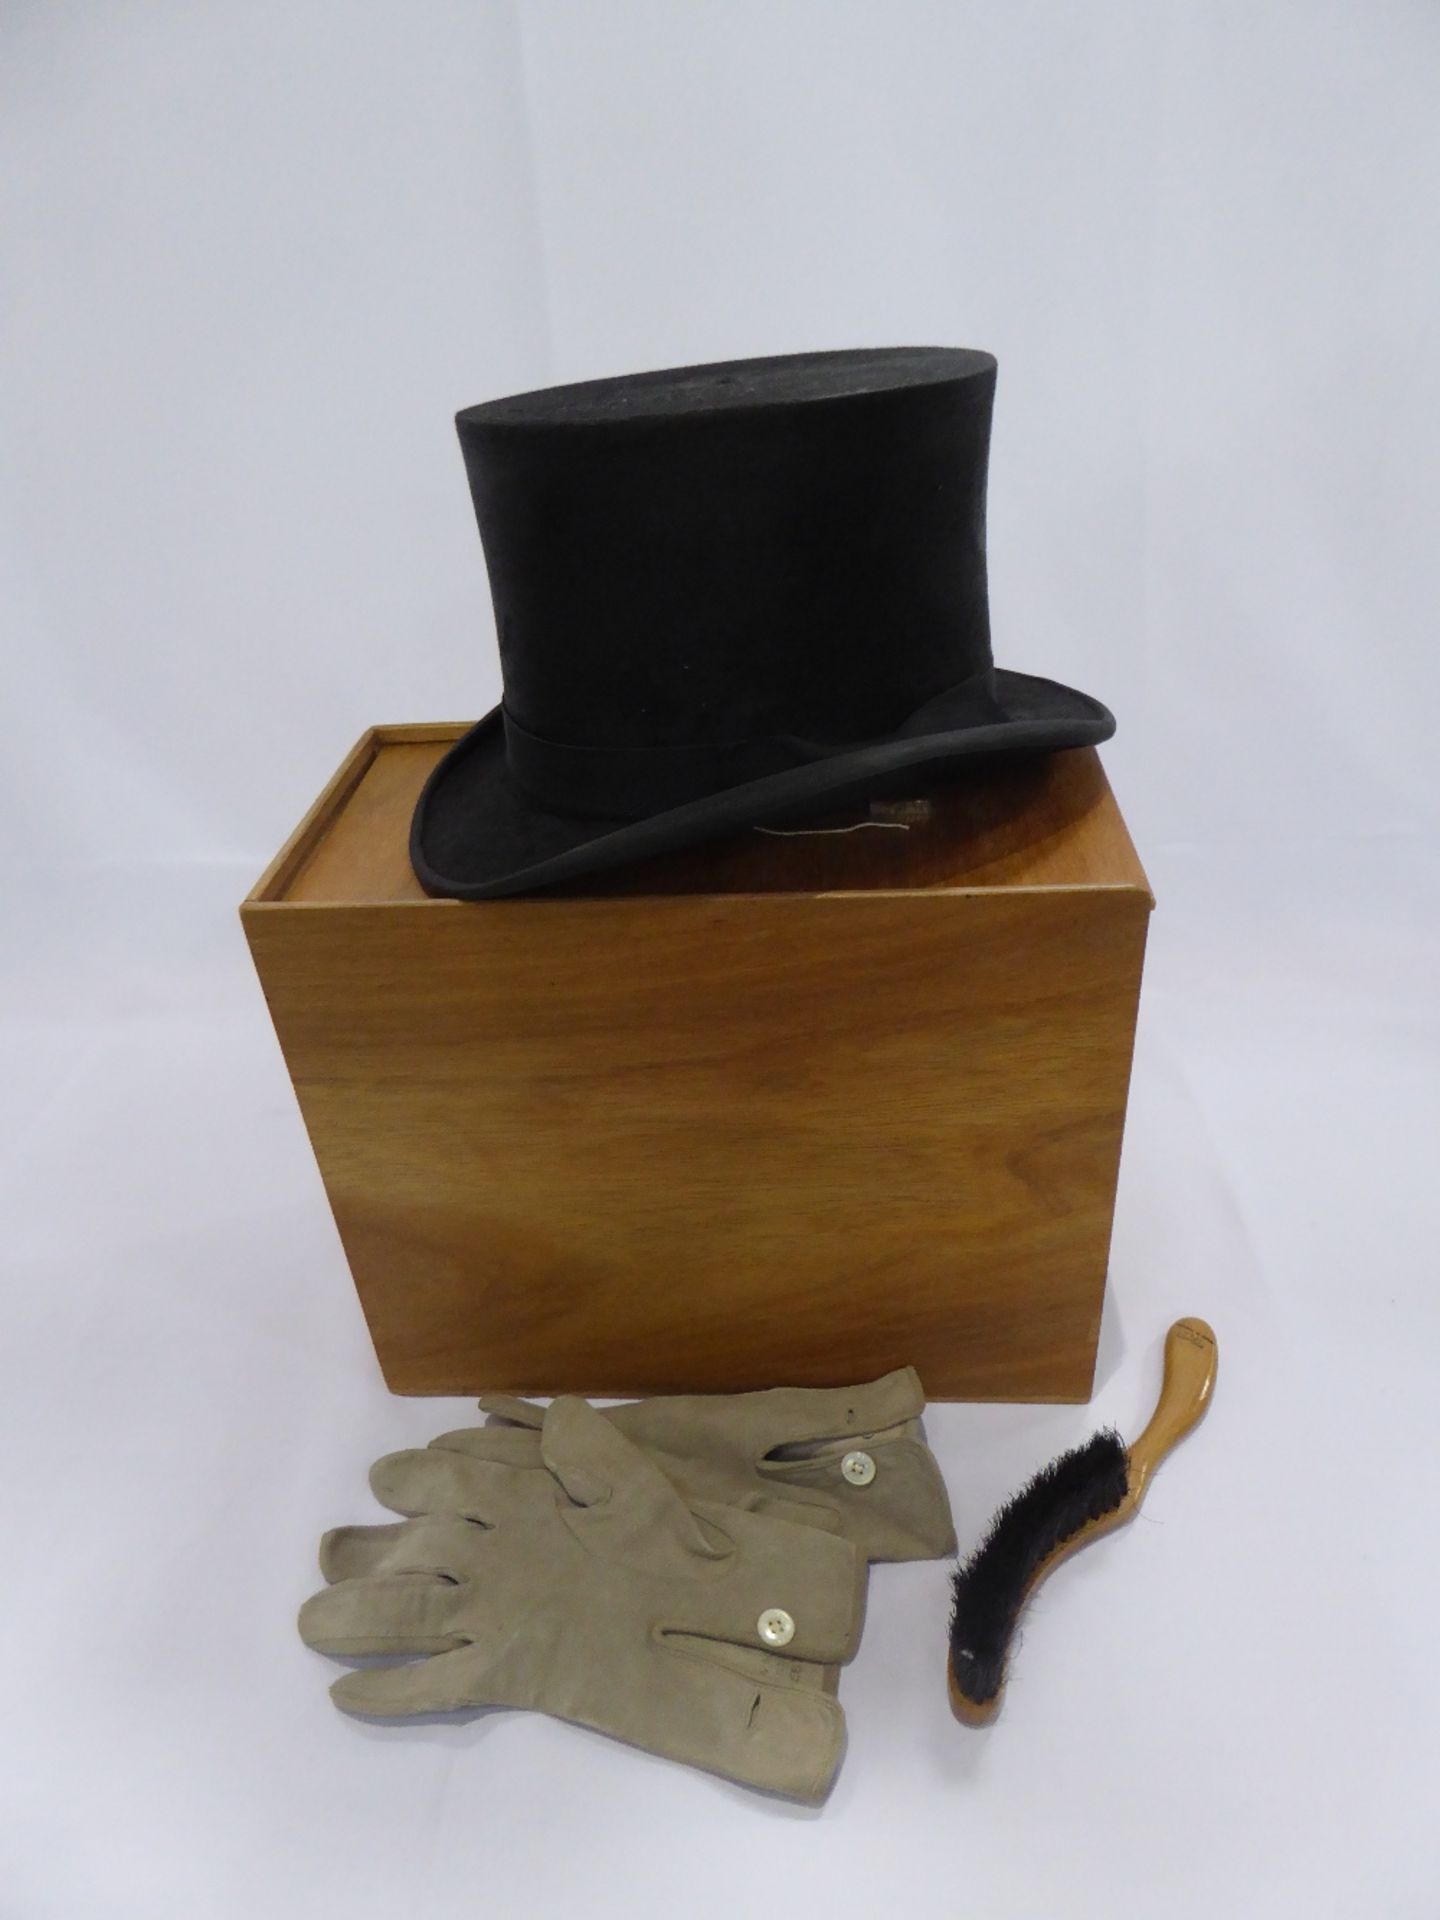 Black vintage silk top hat by Scott & Co., size 7.25 with gloves and a brush, and hat box - Image 2 of 7